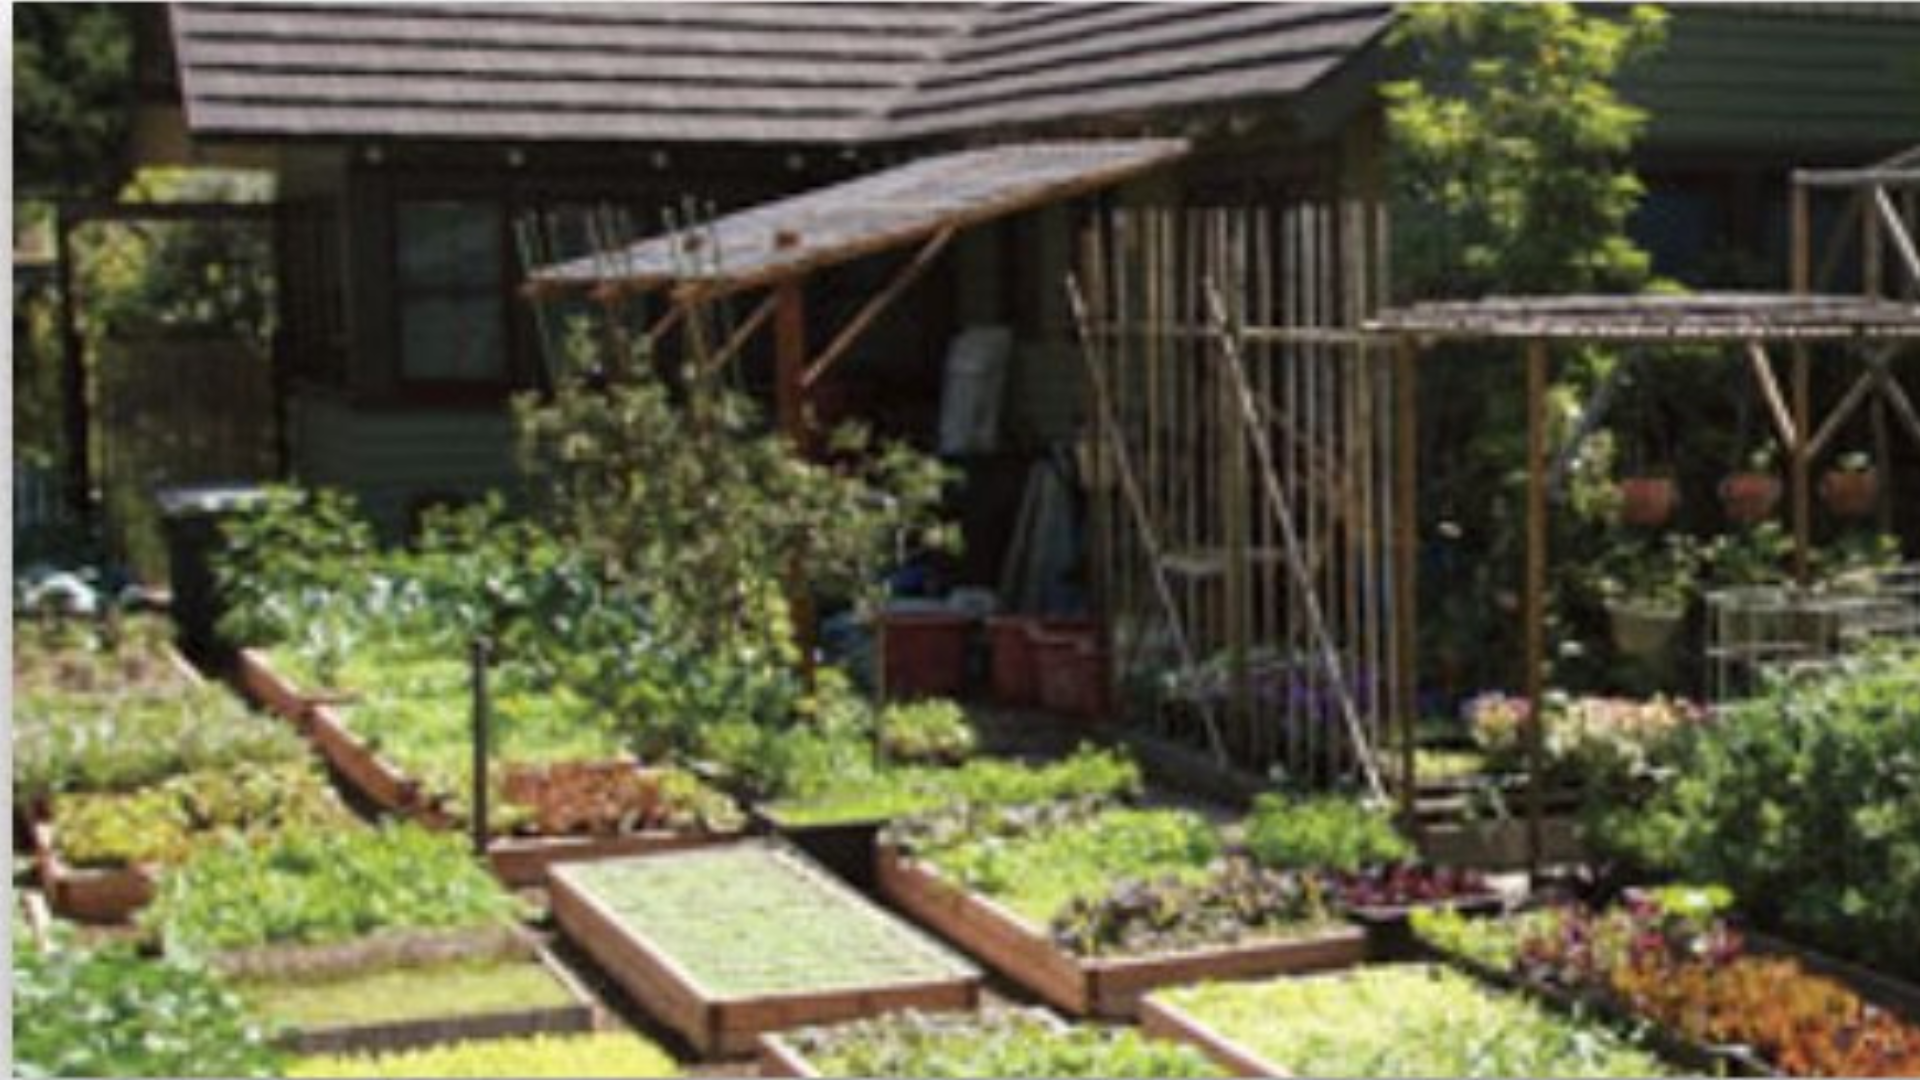 A collection of several vegetable garden beds.